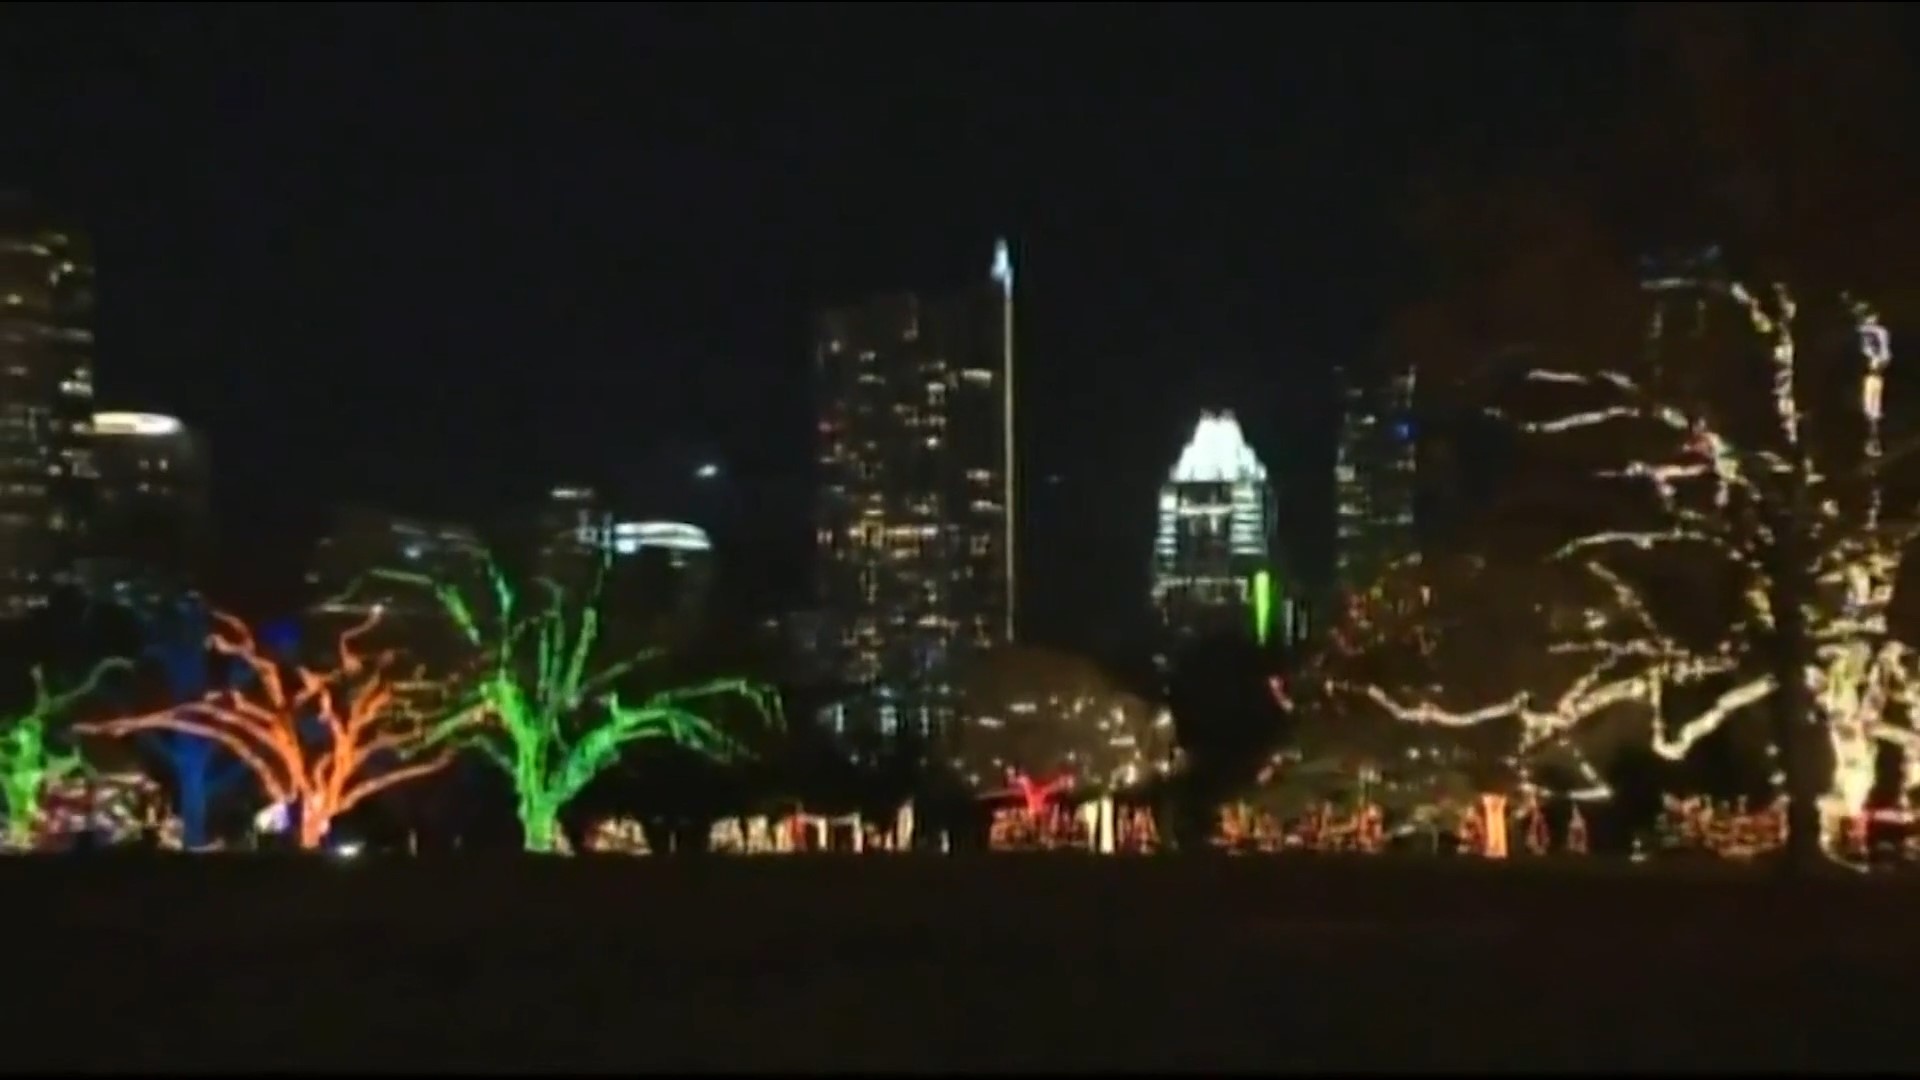 Texas history: Trail of Lights in Austin at Zilker Park